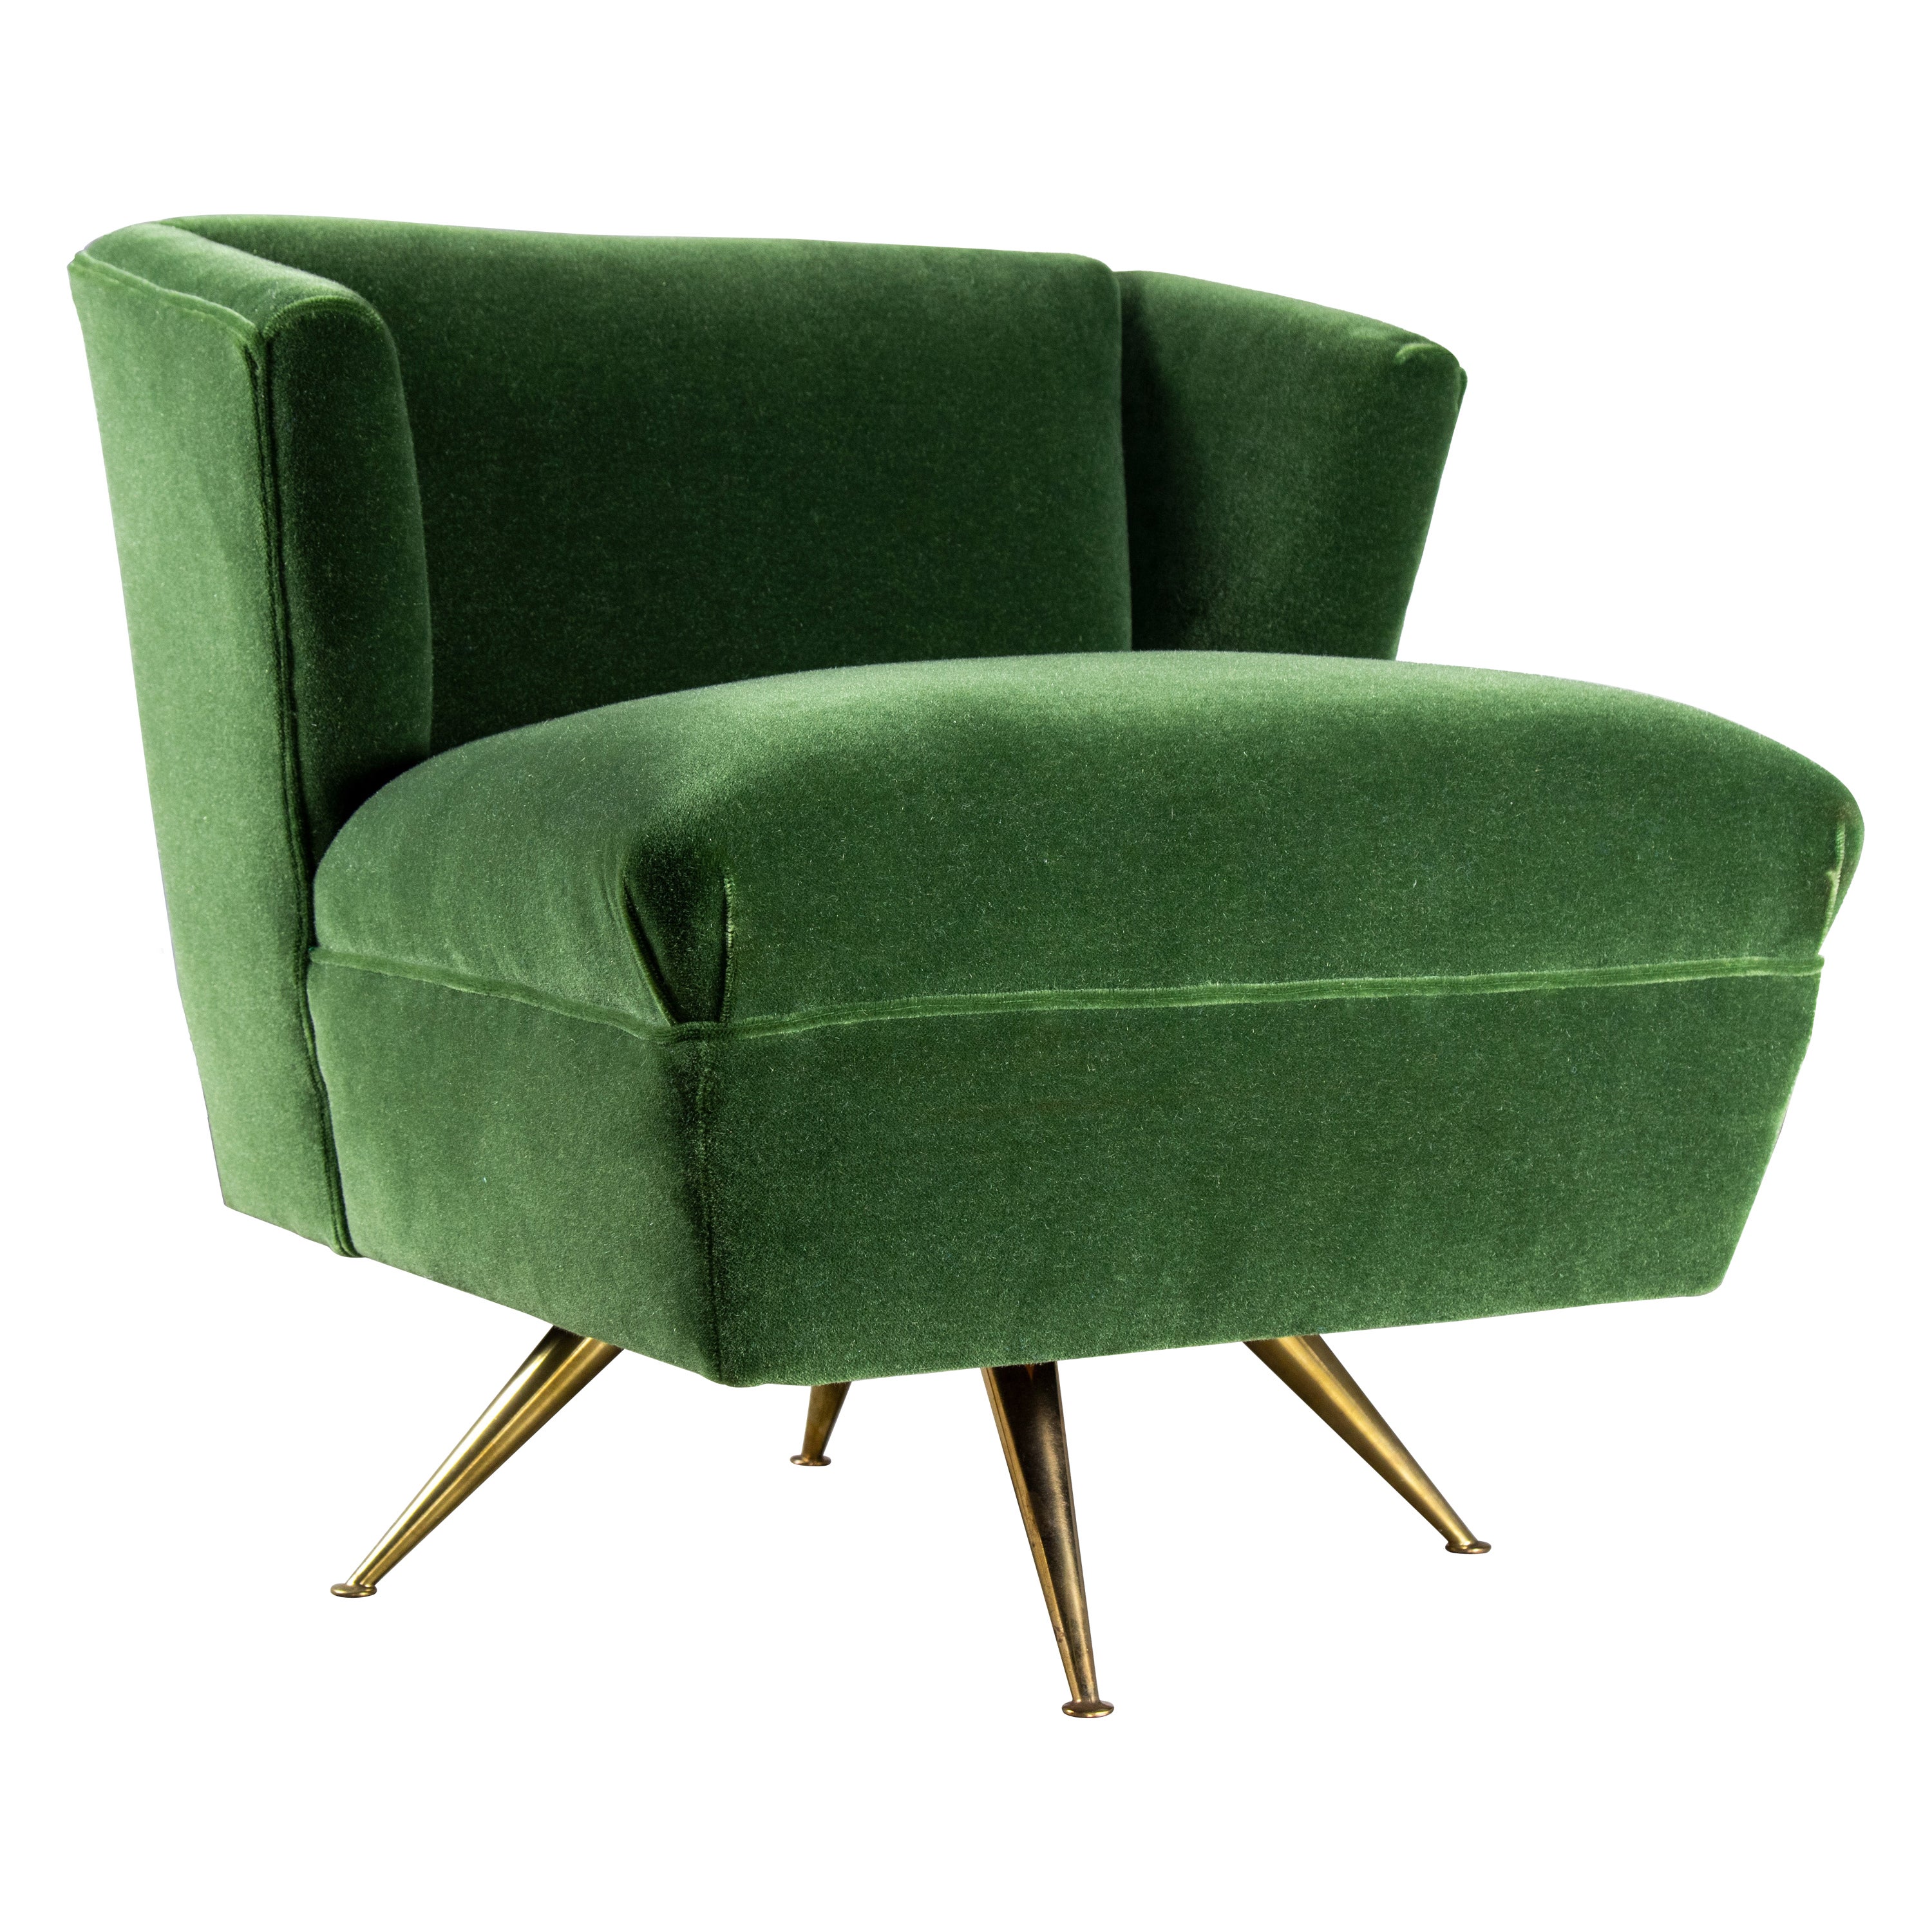 1950s Henry P Glass Swivel Lounge Chair Green Mohair on Brass Legs JL Chase Co.